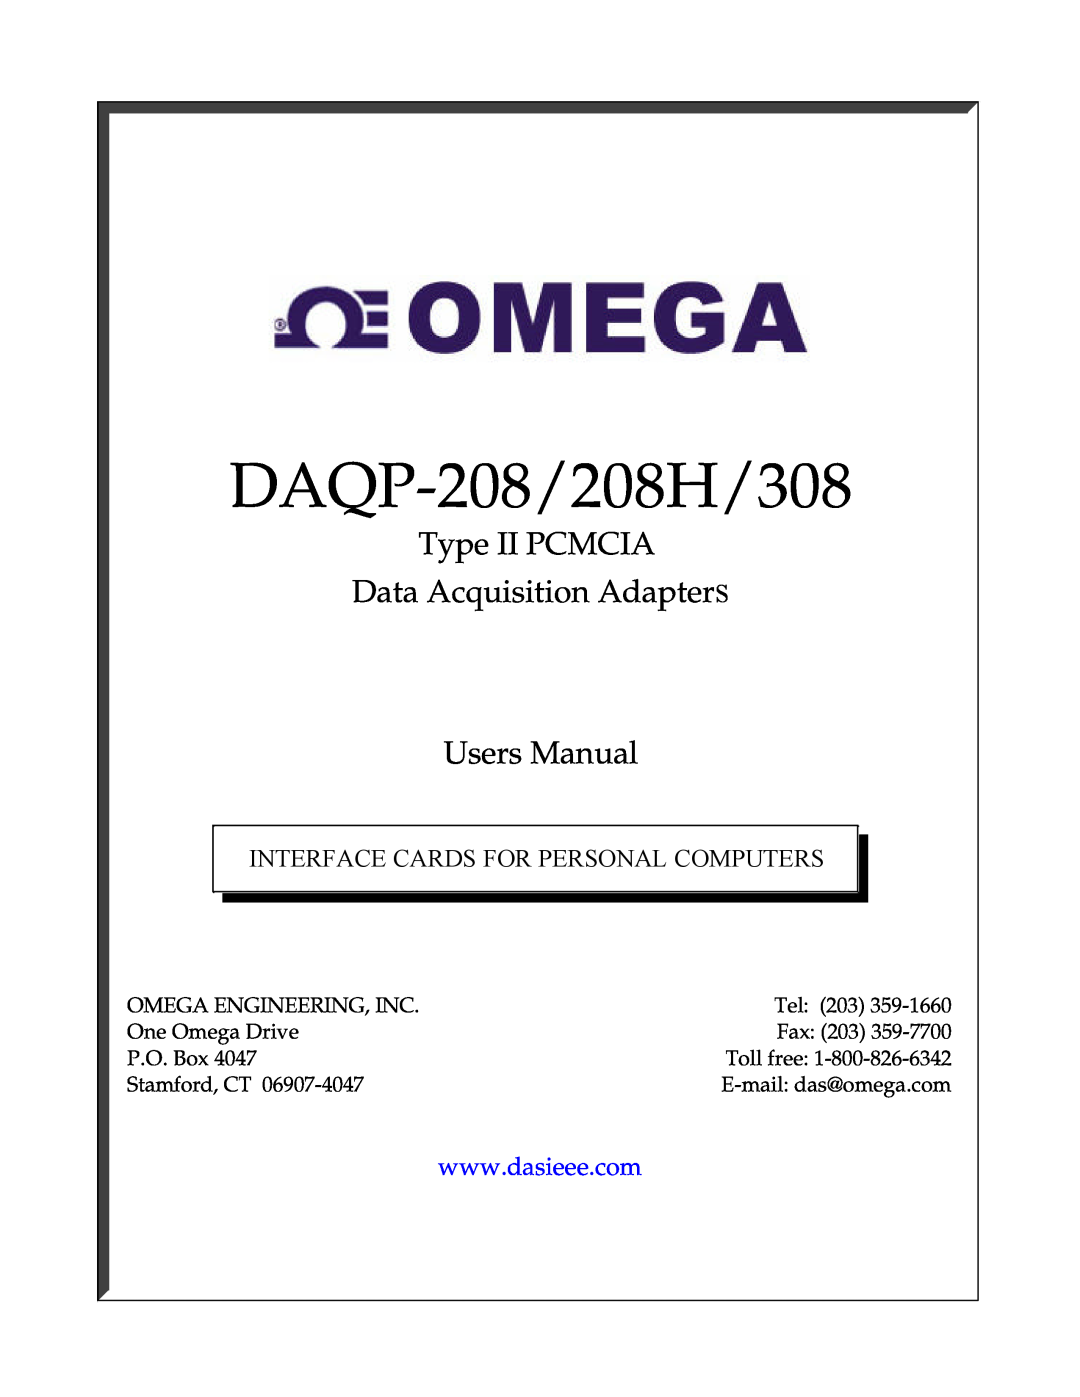 Omega user manual Type II PCMCIA, Data Acquisition Adapter s, DAQP-208/208H/308, Users Manual 